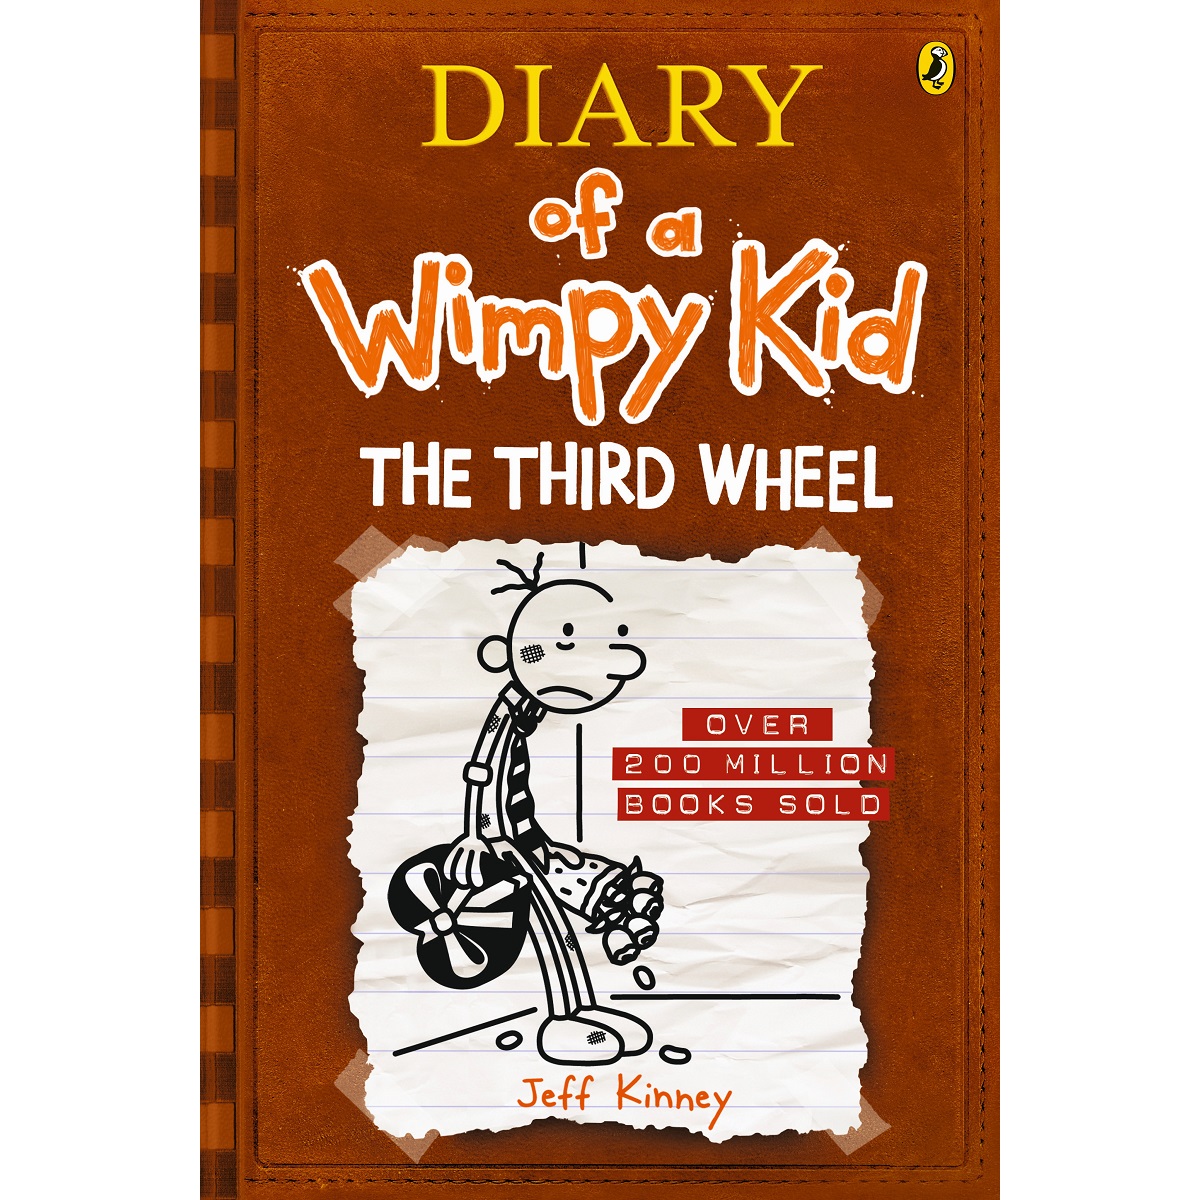 https://www.tarbiyahbooksplus.com/shop/islamic-books-and-products-for-children/diary-of-a-wimpy-kid-the-third-wheel-by-jeff-kinney/